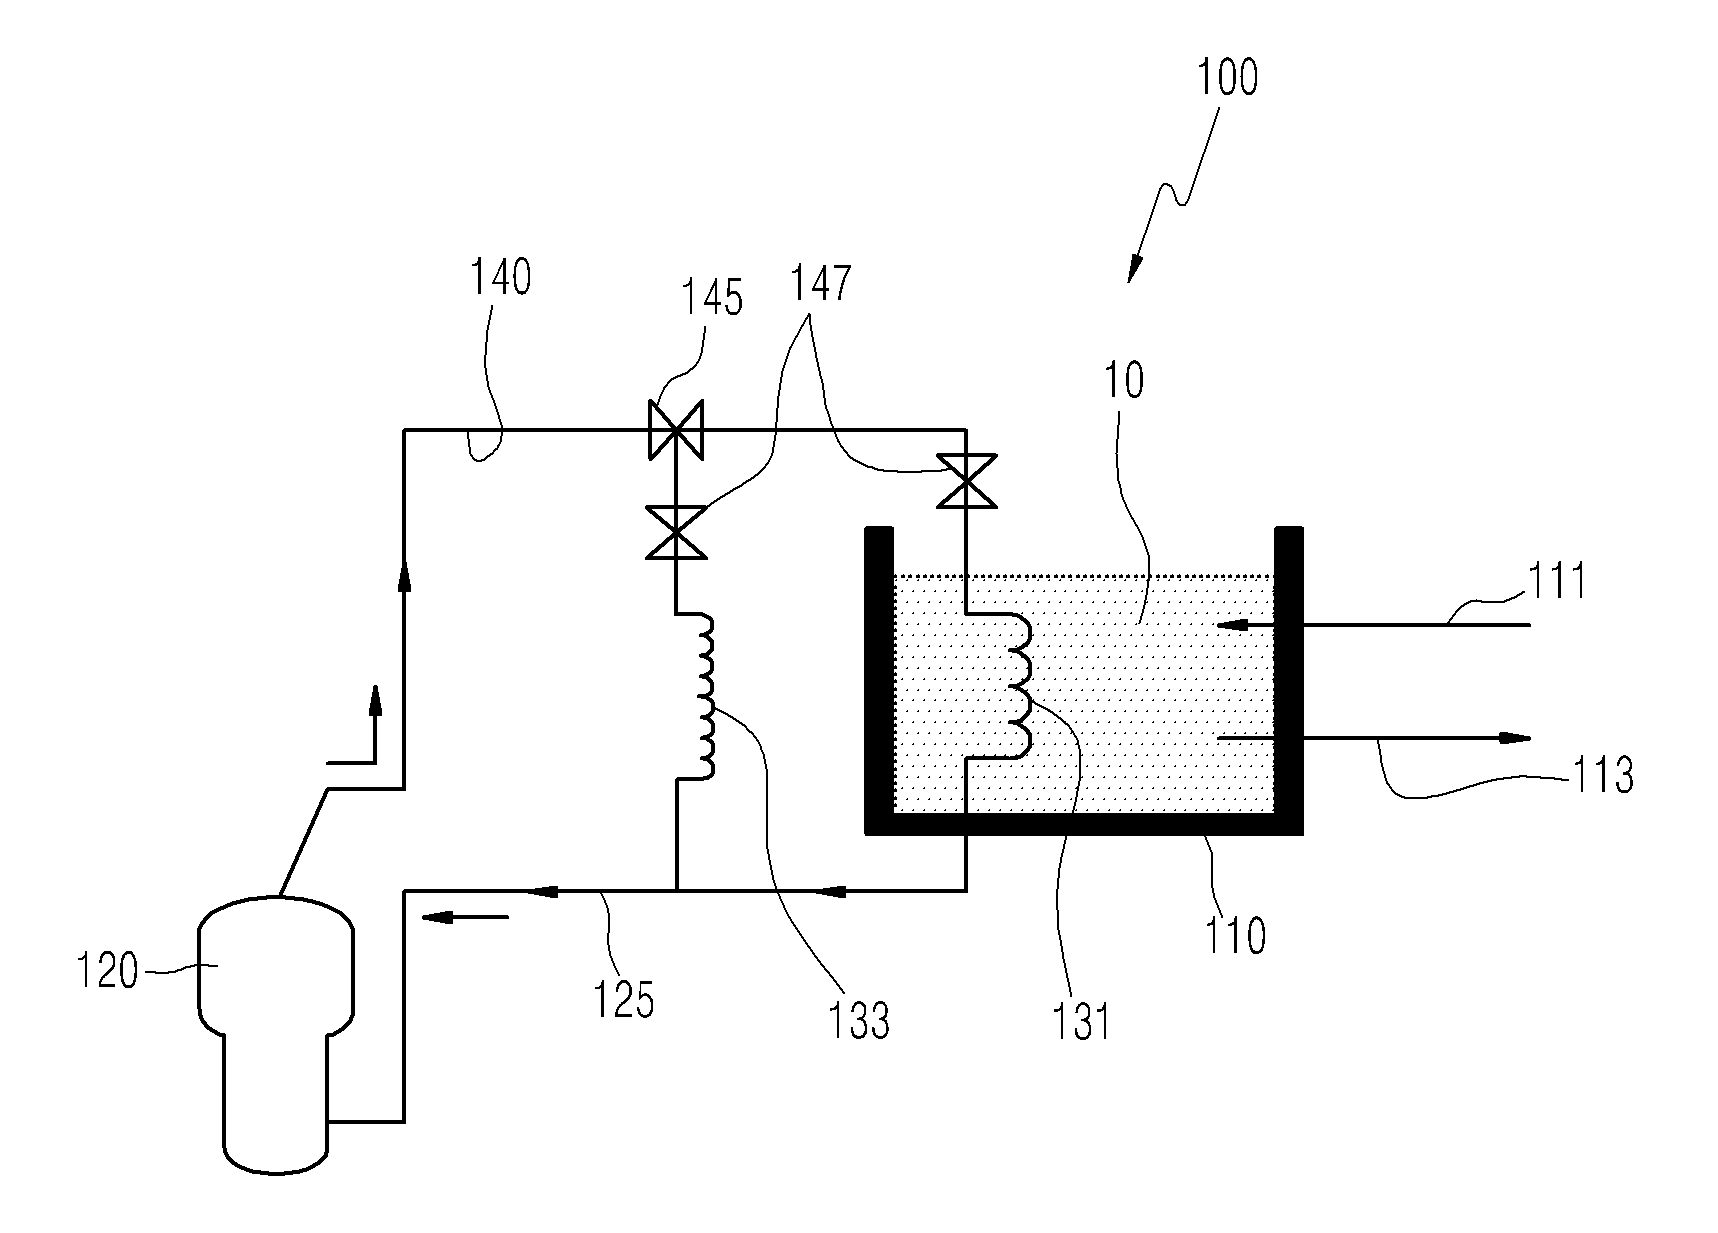 Passive cooling system of nuclear power plant